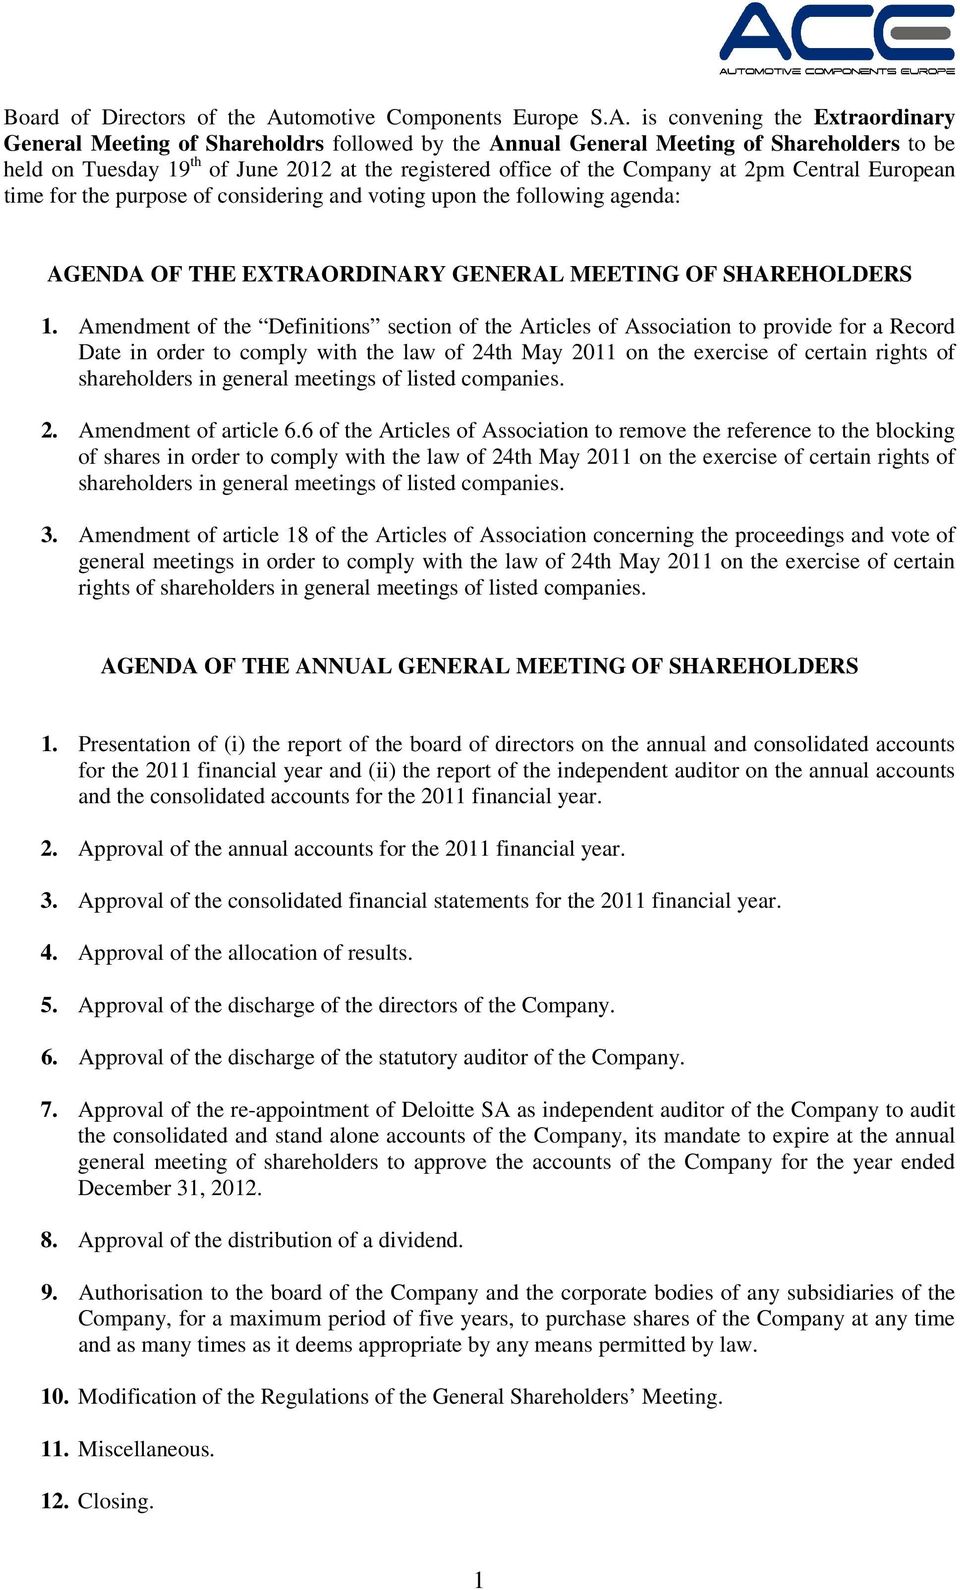 is convening the Extraordinary General Meeting of Shareholdrs followed by the Annual General Meeting of Shareholders to be held on Tuesday 19 th of June 2012 at the registered office of the Company